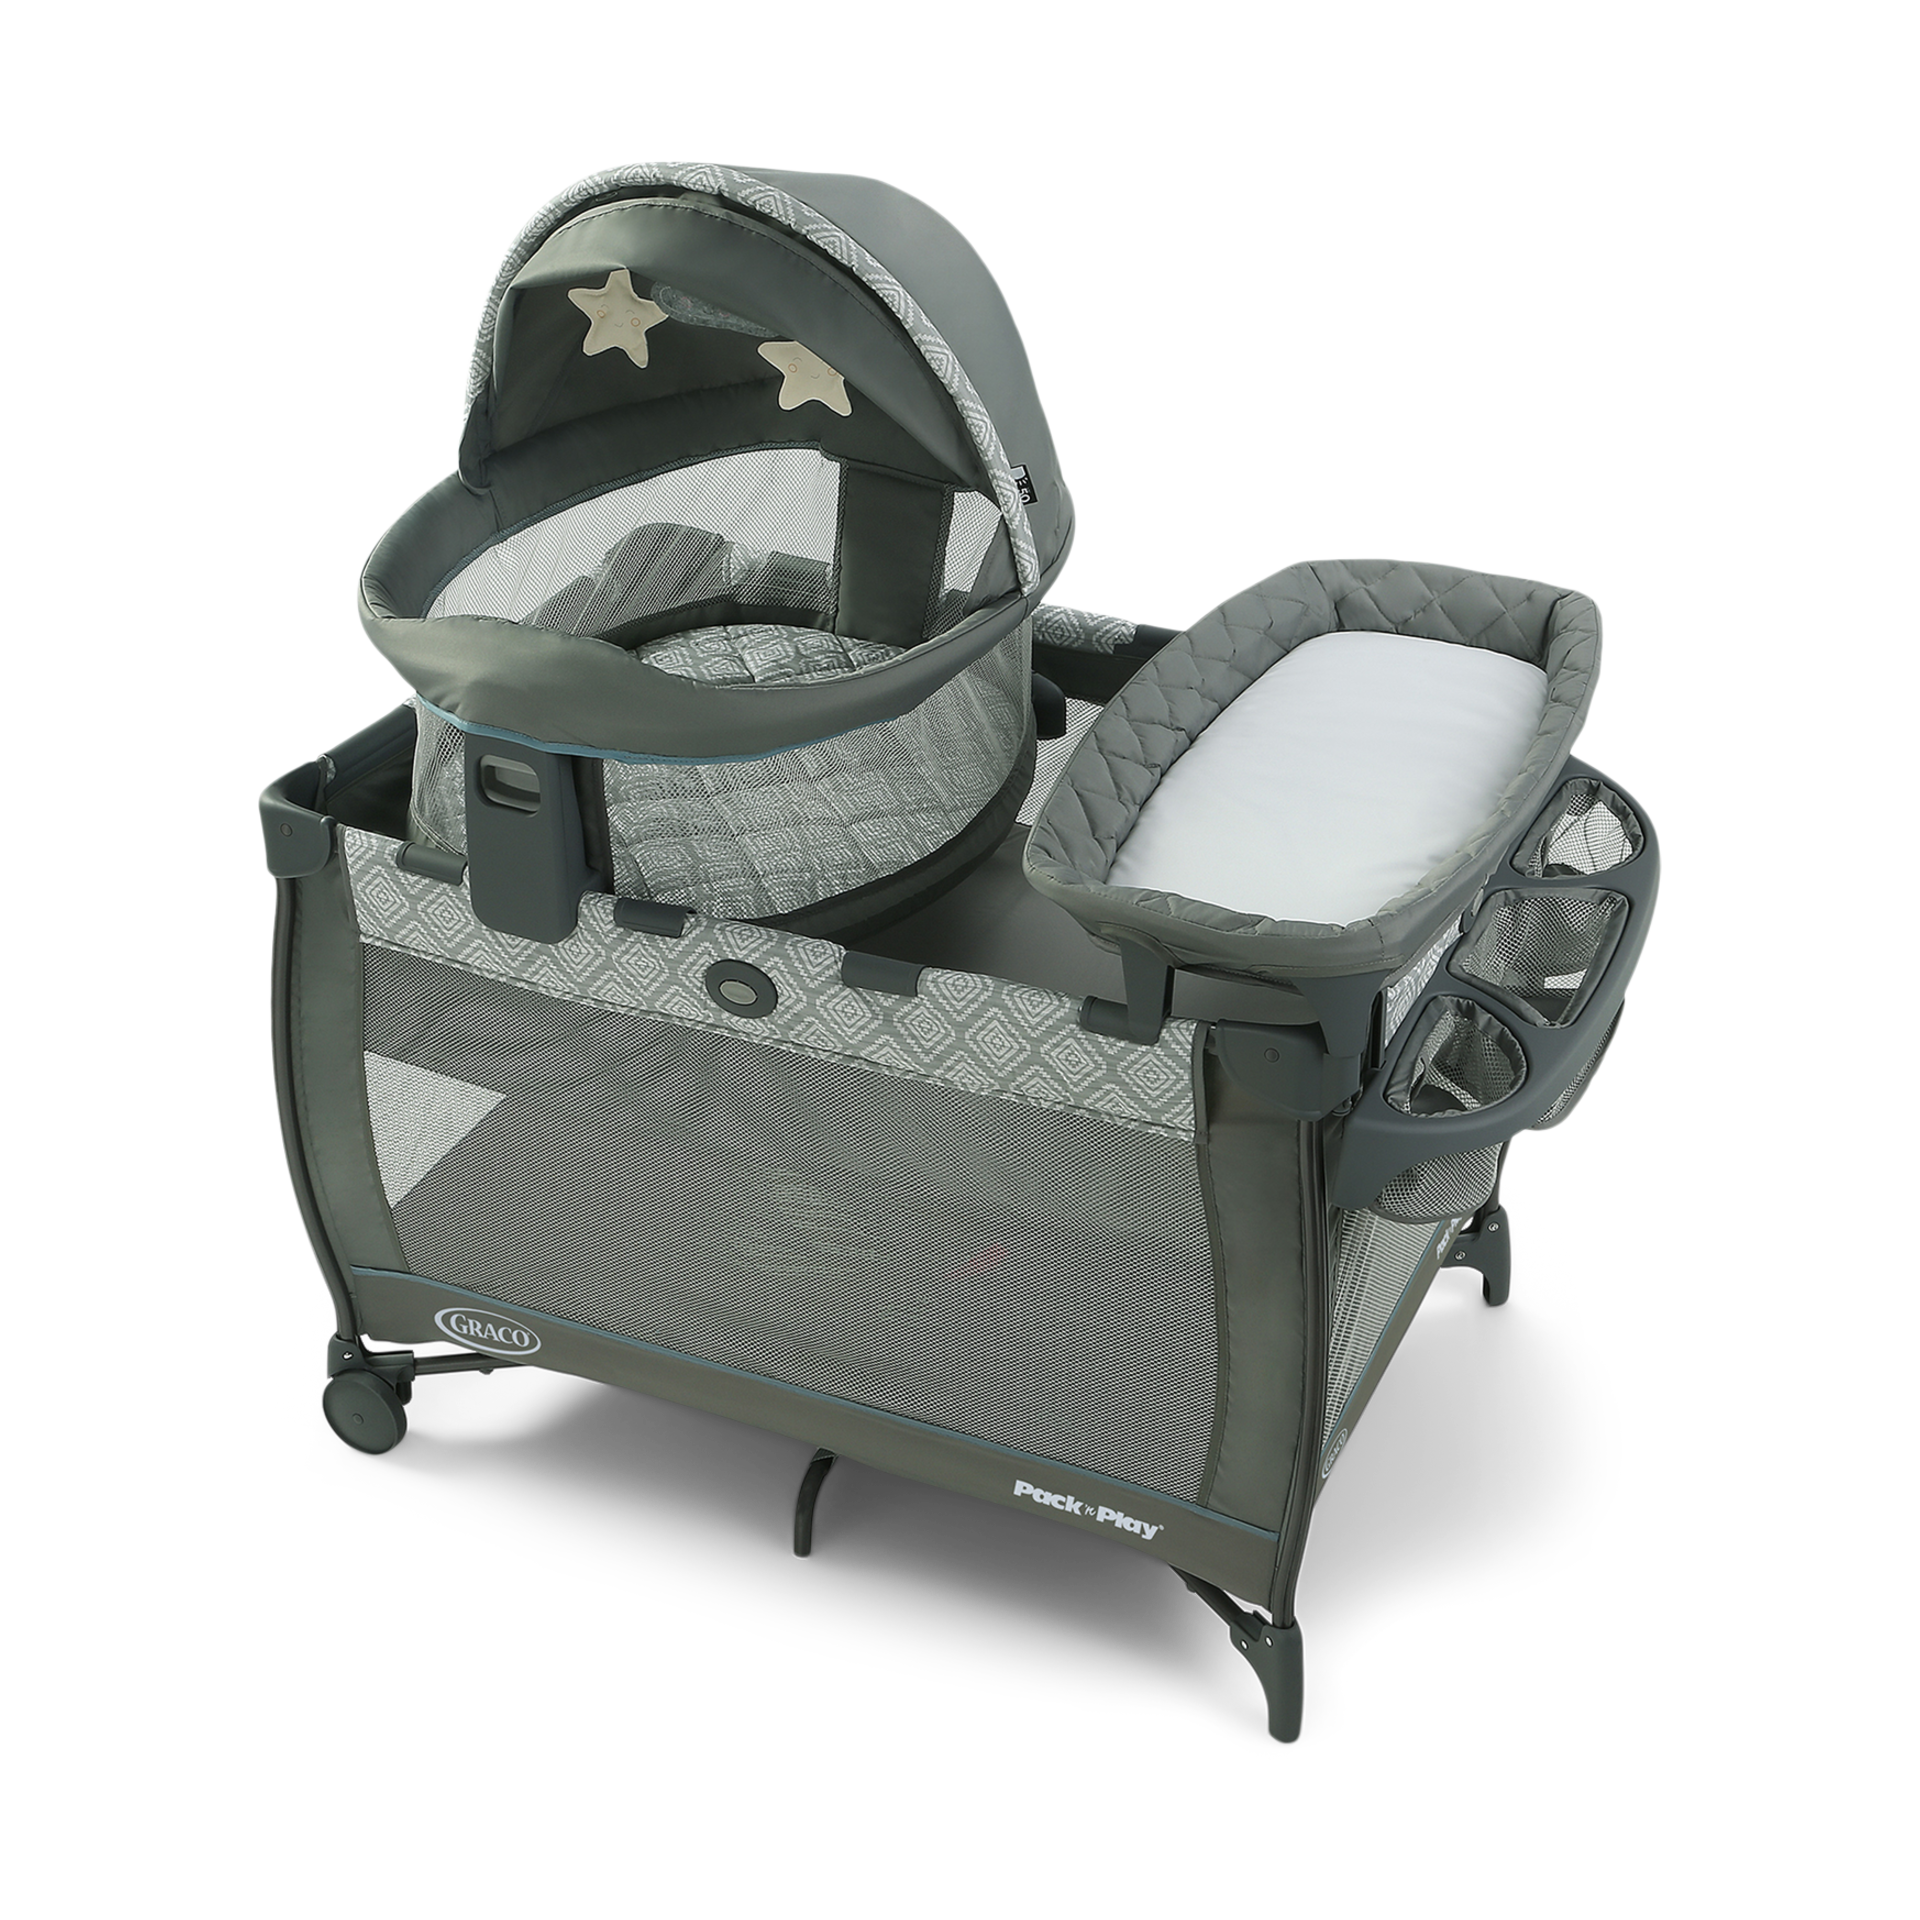 graco pack play